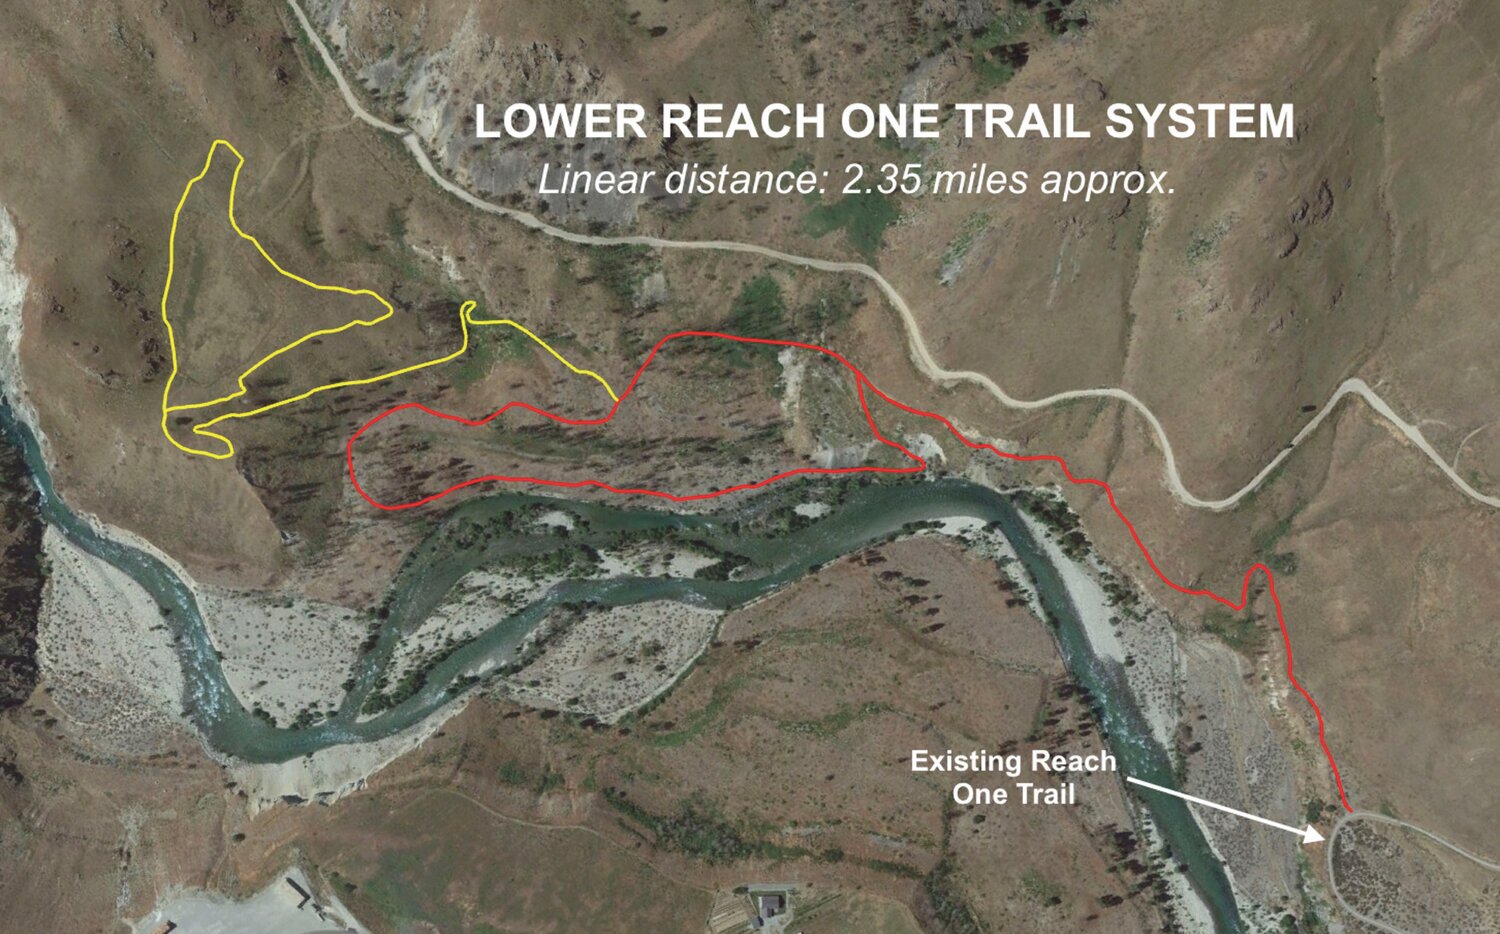 Planned are two loops with options for multiple routes and distances that are expected to be popular with hikers and trail runners. It will be built in two phases, the first starting in 2019. Plans are to build the second loop in 2020. The trail will be a safe distance from the Chelan River to protect users and guard against erosion.
Graphic provided by Chelan County PUD